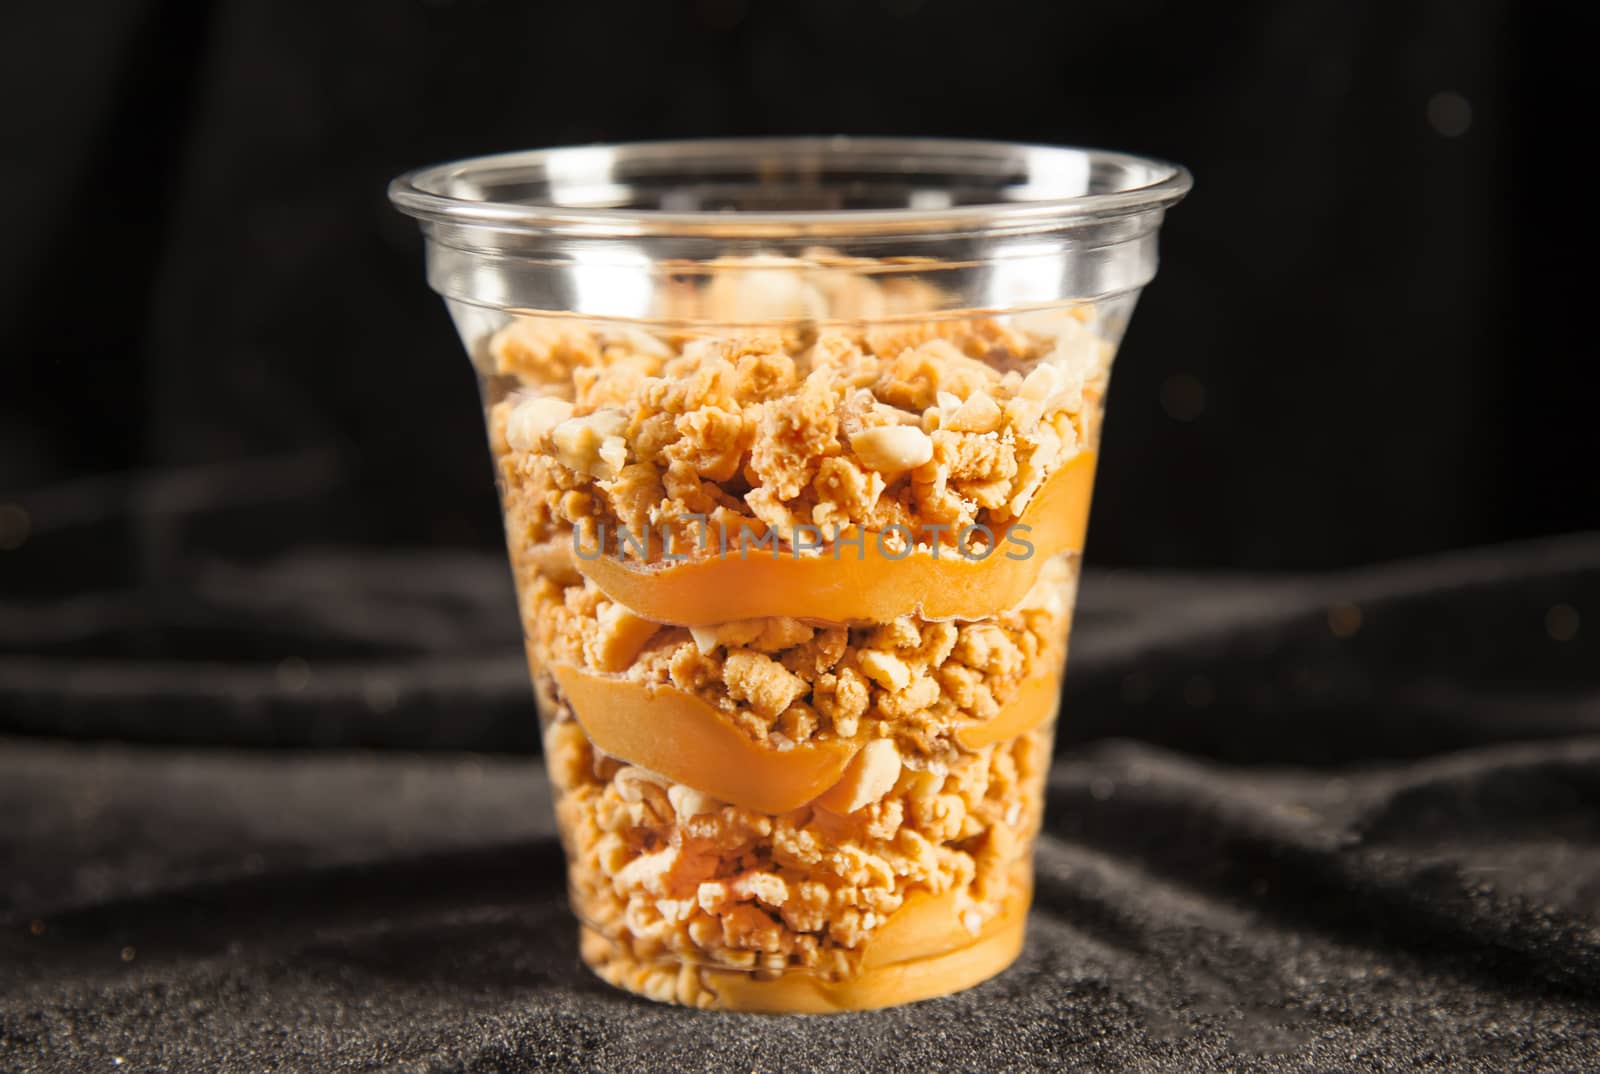 Peanut cake in plastic cup on black background by RawGroup